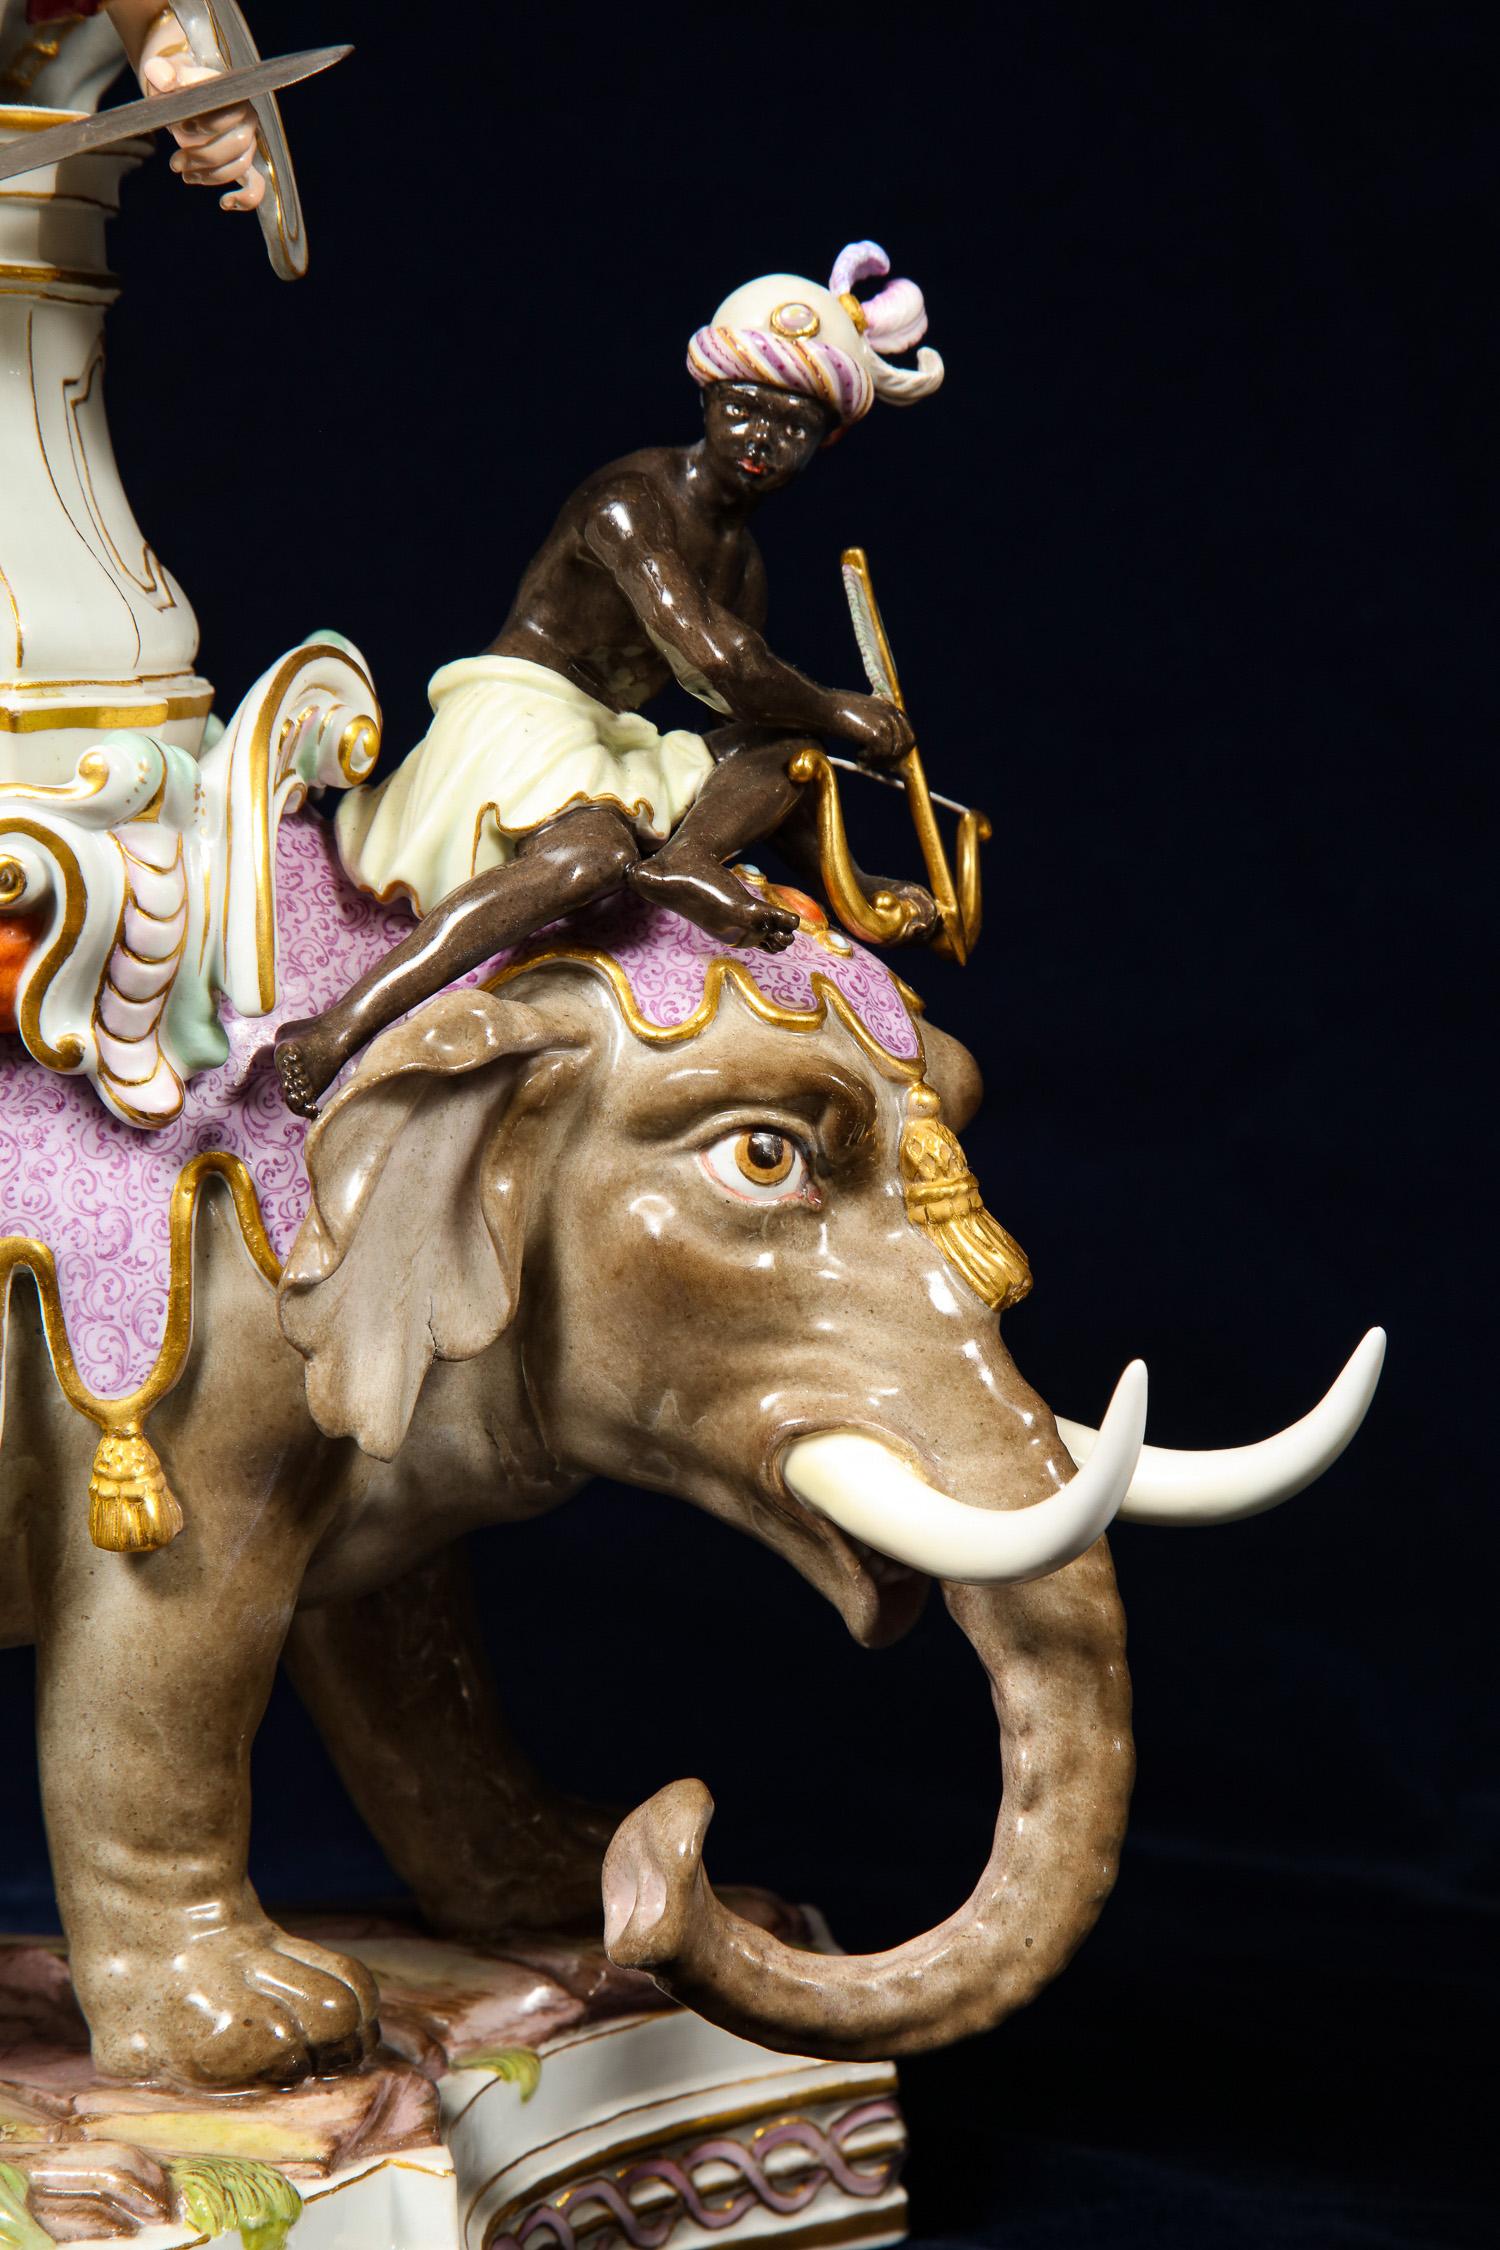 Hand-Carved Important Pair of Meissen Porcelain Groups of Caparisoned Elephants and Soldiers